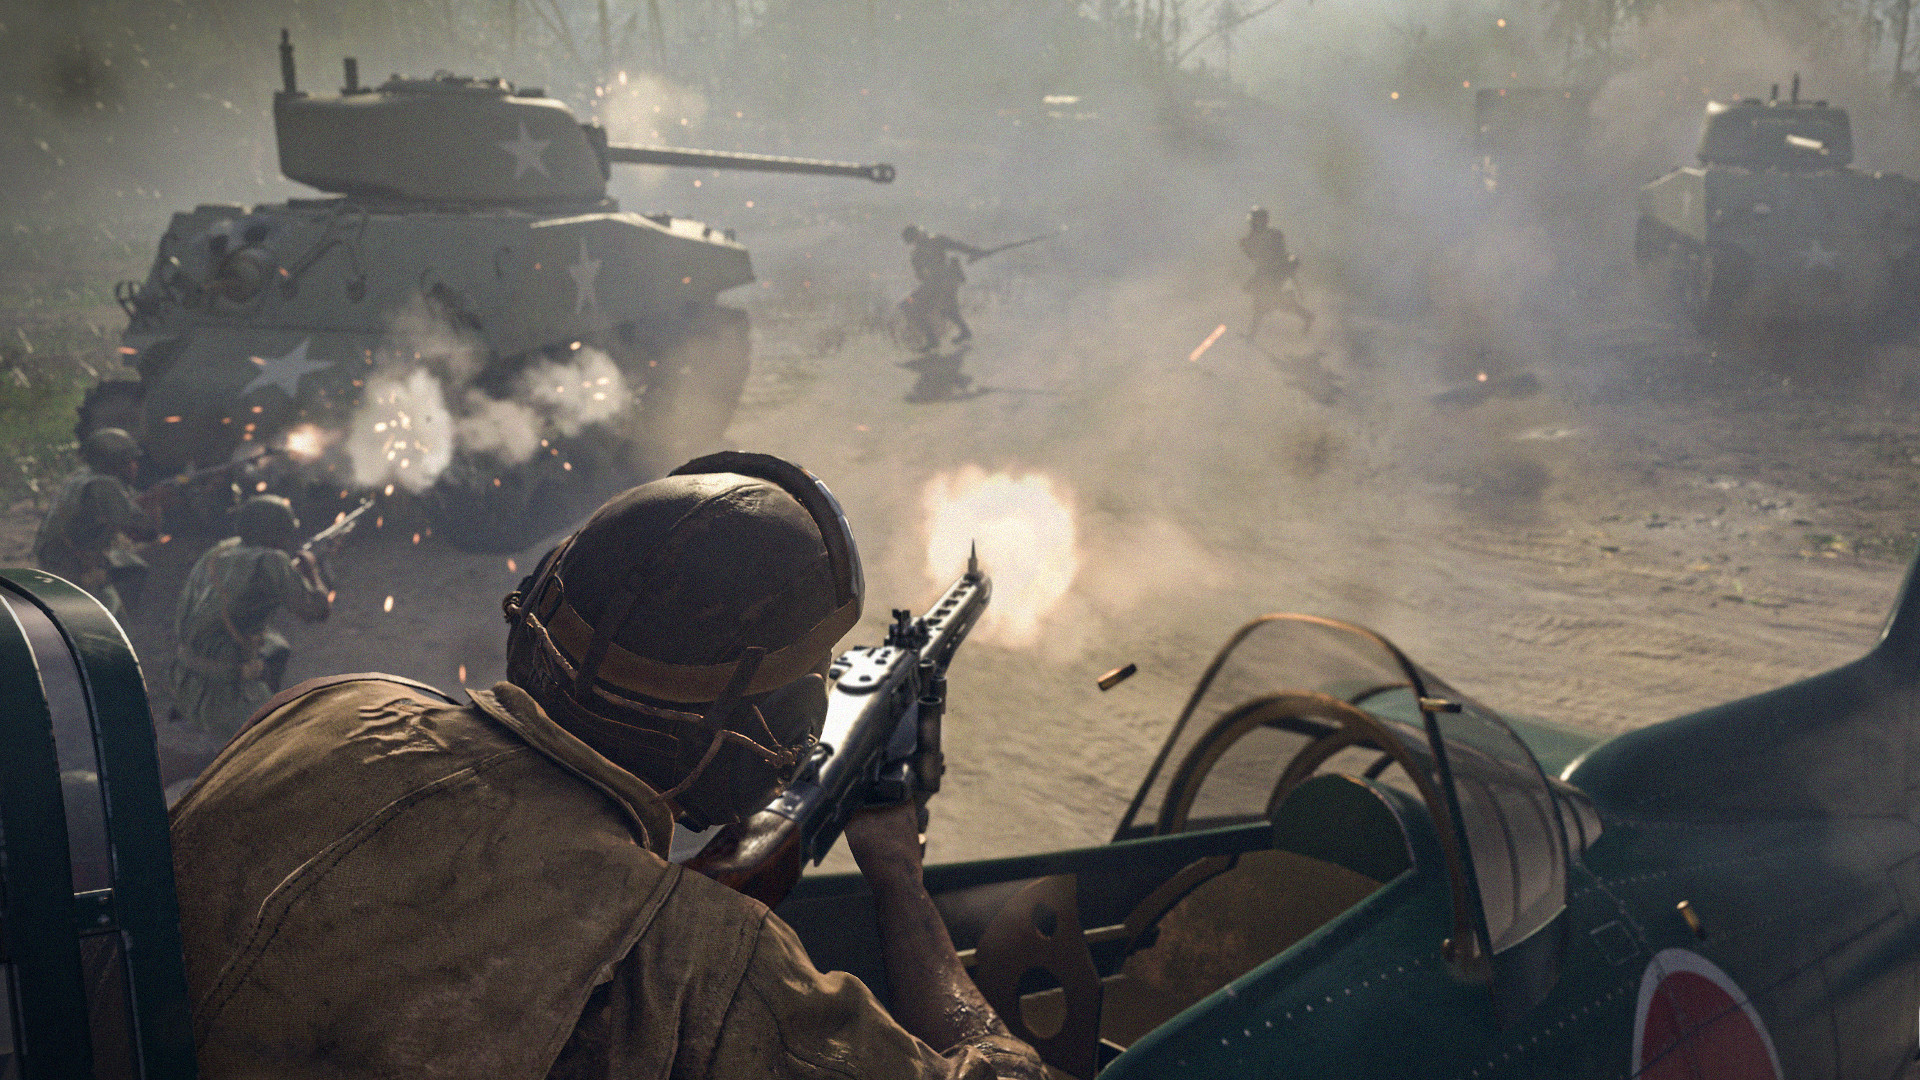 Call of Duty Vanguard release date: A soldier firing a machine gun at enemies from the back of a parked plane, with tanks on the move.